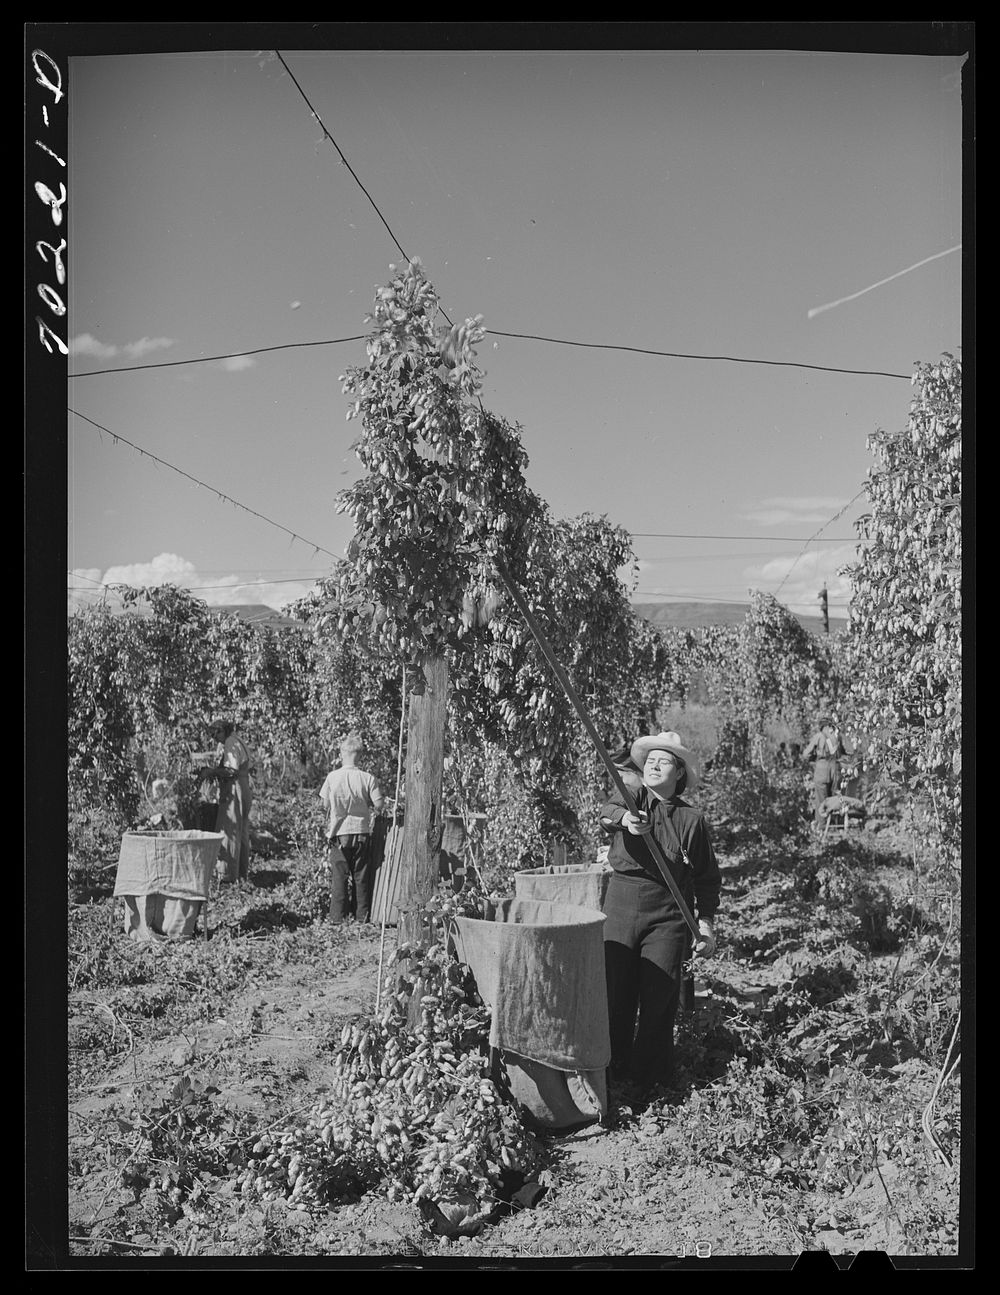 Pulling down vines in hop field. The hops or burns are then picked from the vines. Yakima County, Washington by Russell Lee